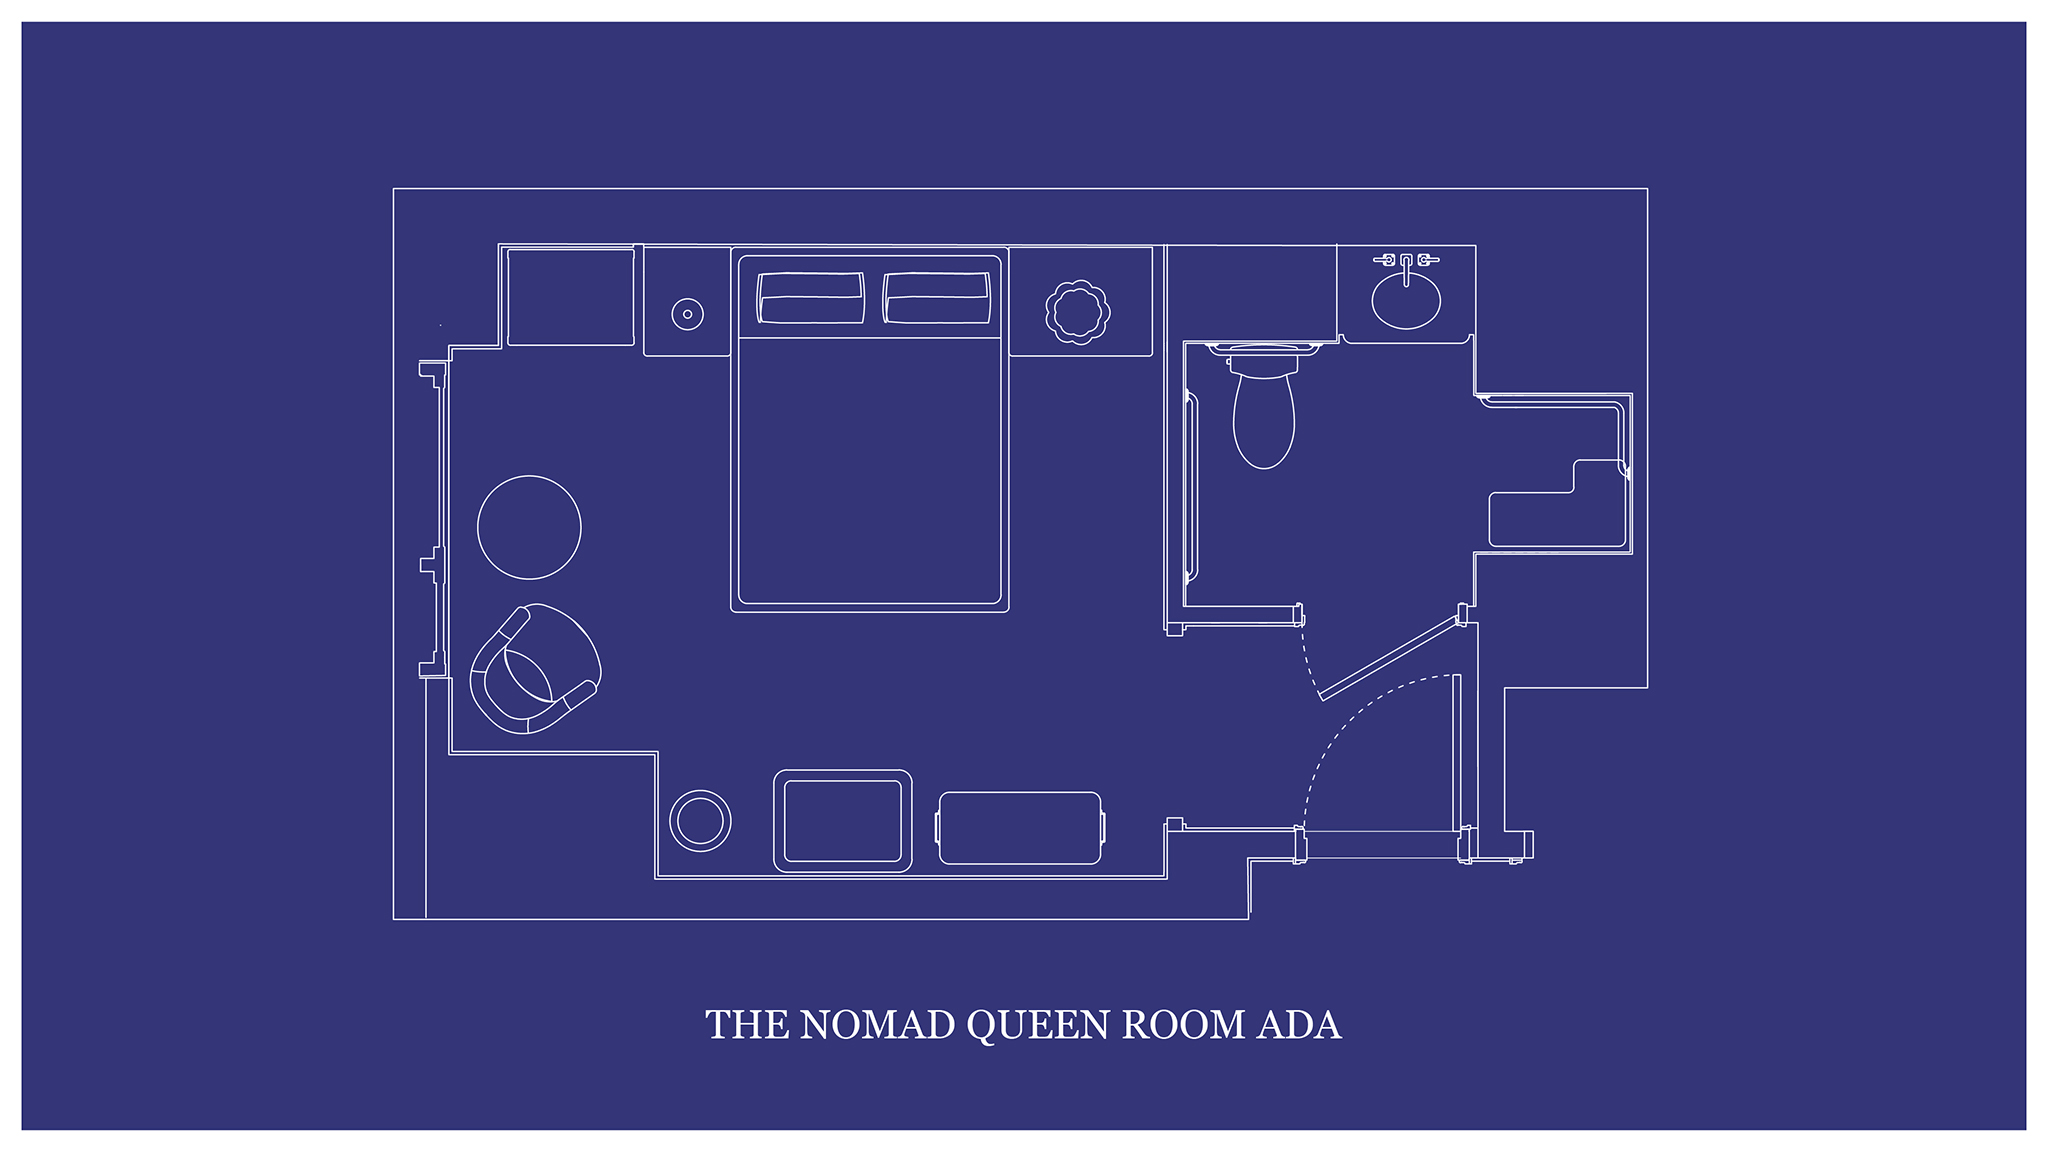 Architectural layout map of "THE NOMAD QUEEN ROOM ADA" presented in blueprints.